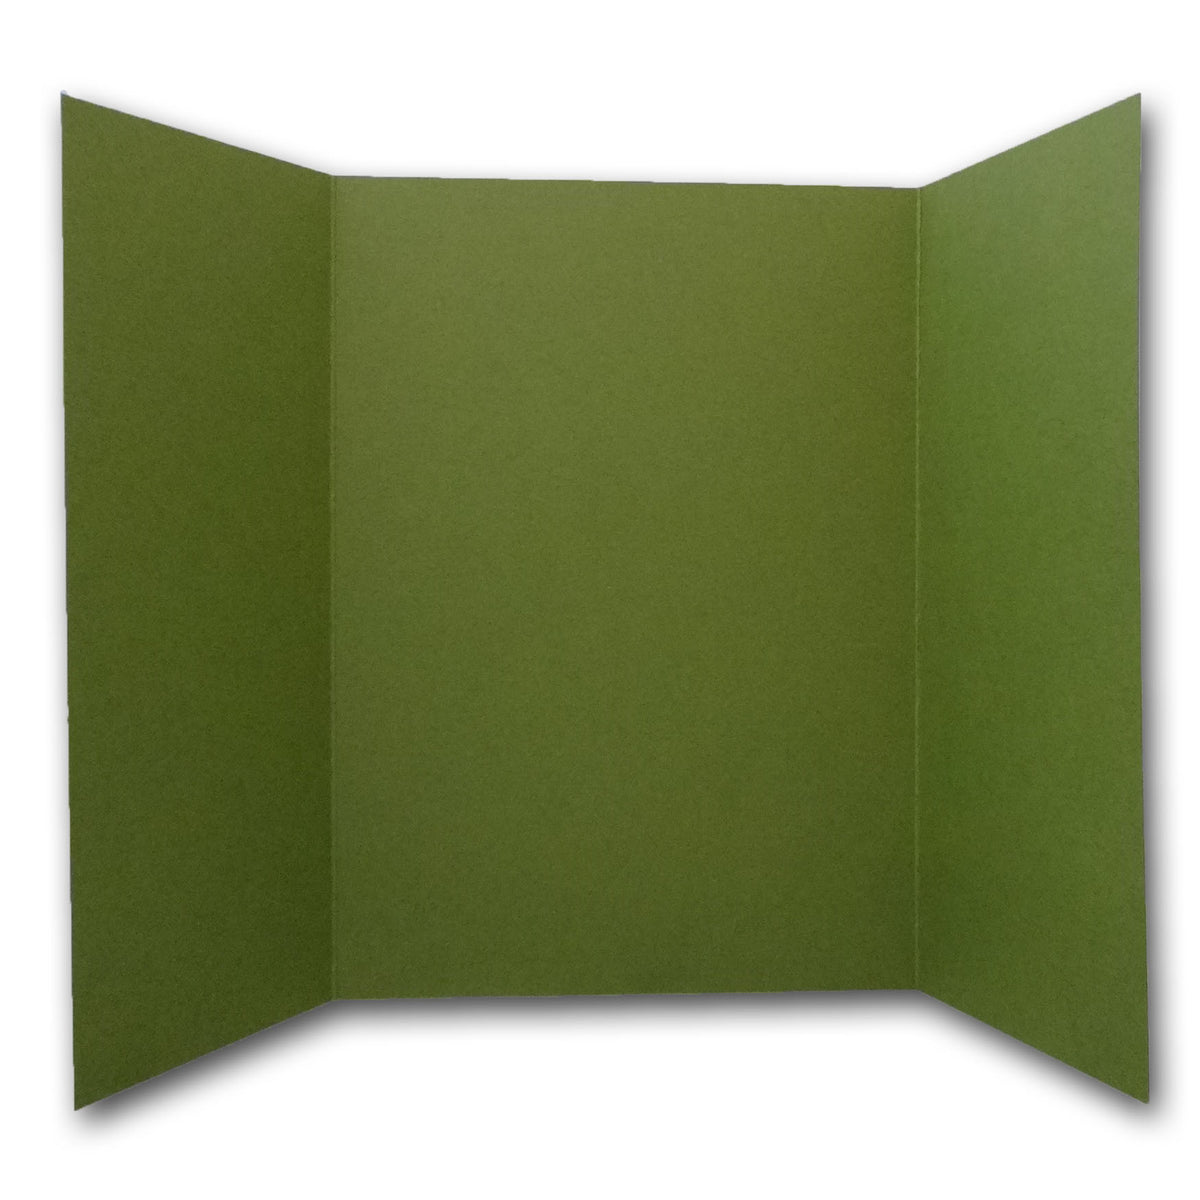 Deep Olive Green 5x7 Gate Fold Discount Card Stock for DIY Invitations